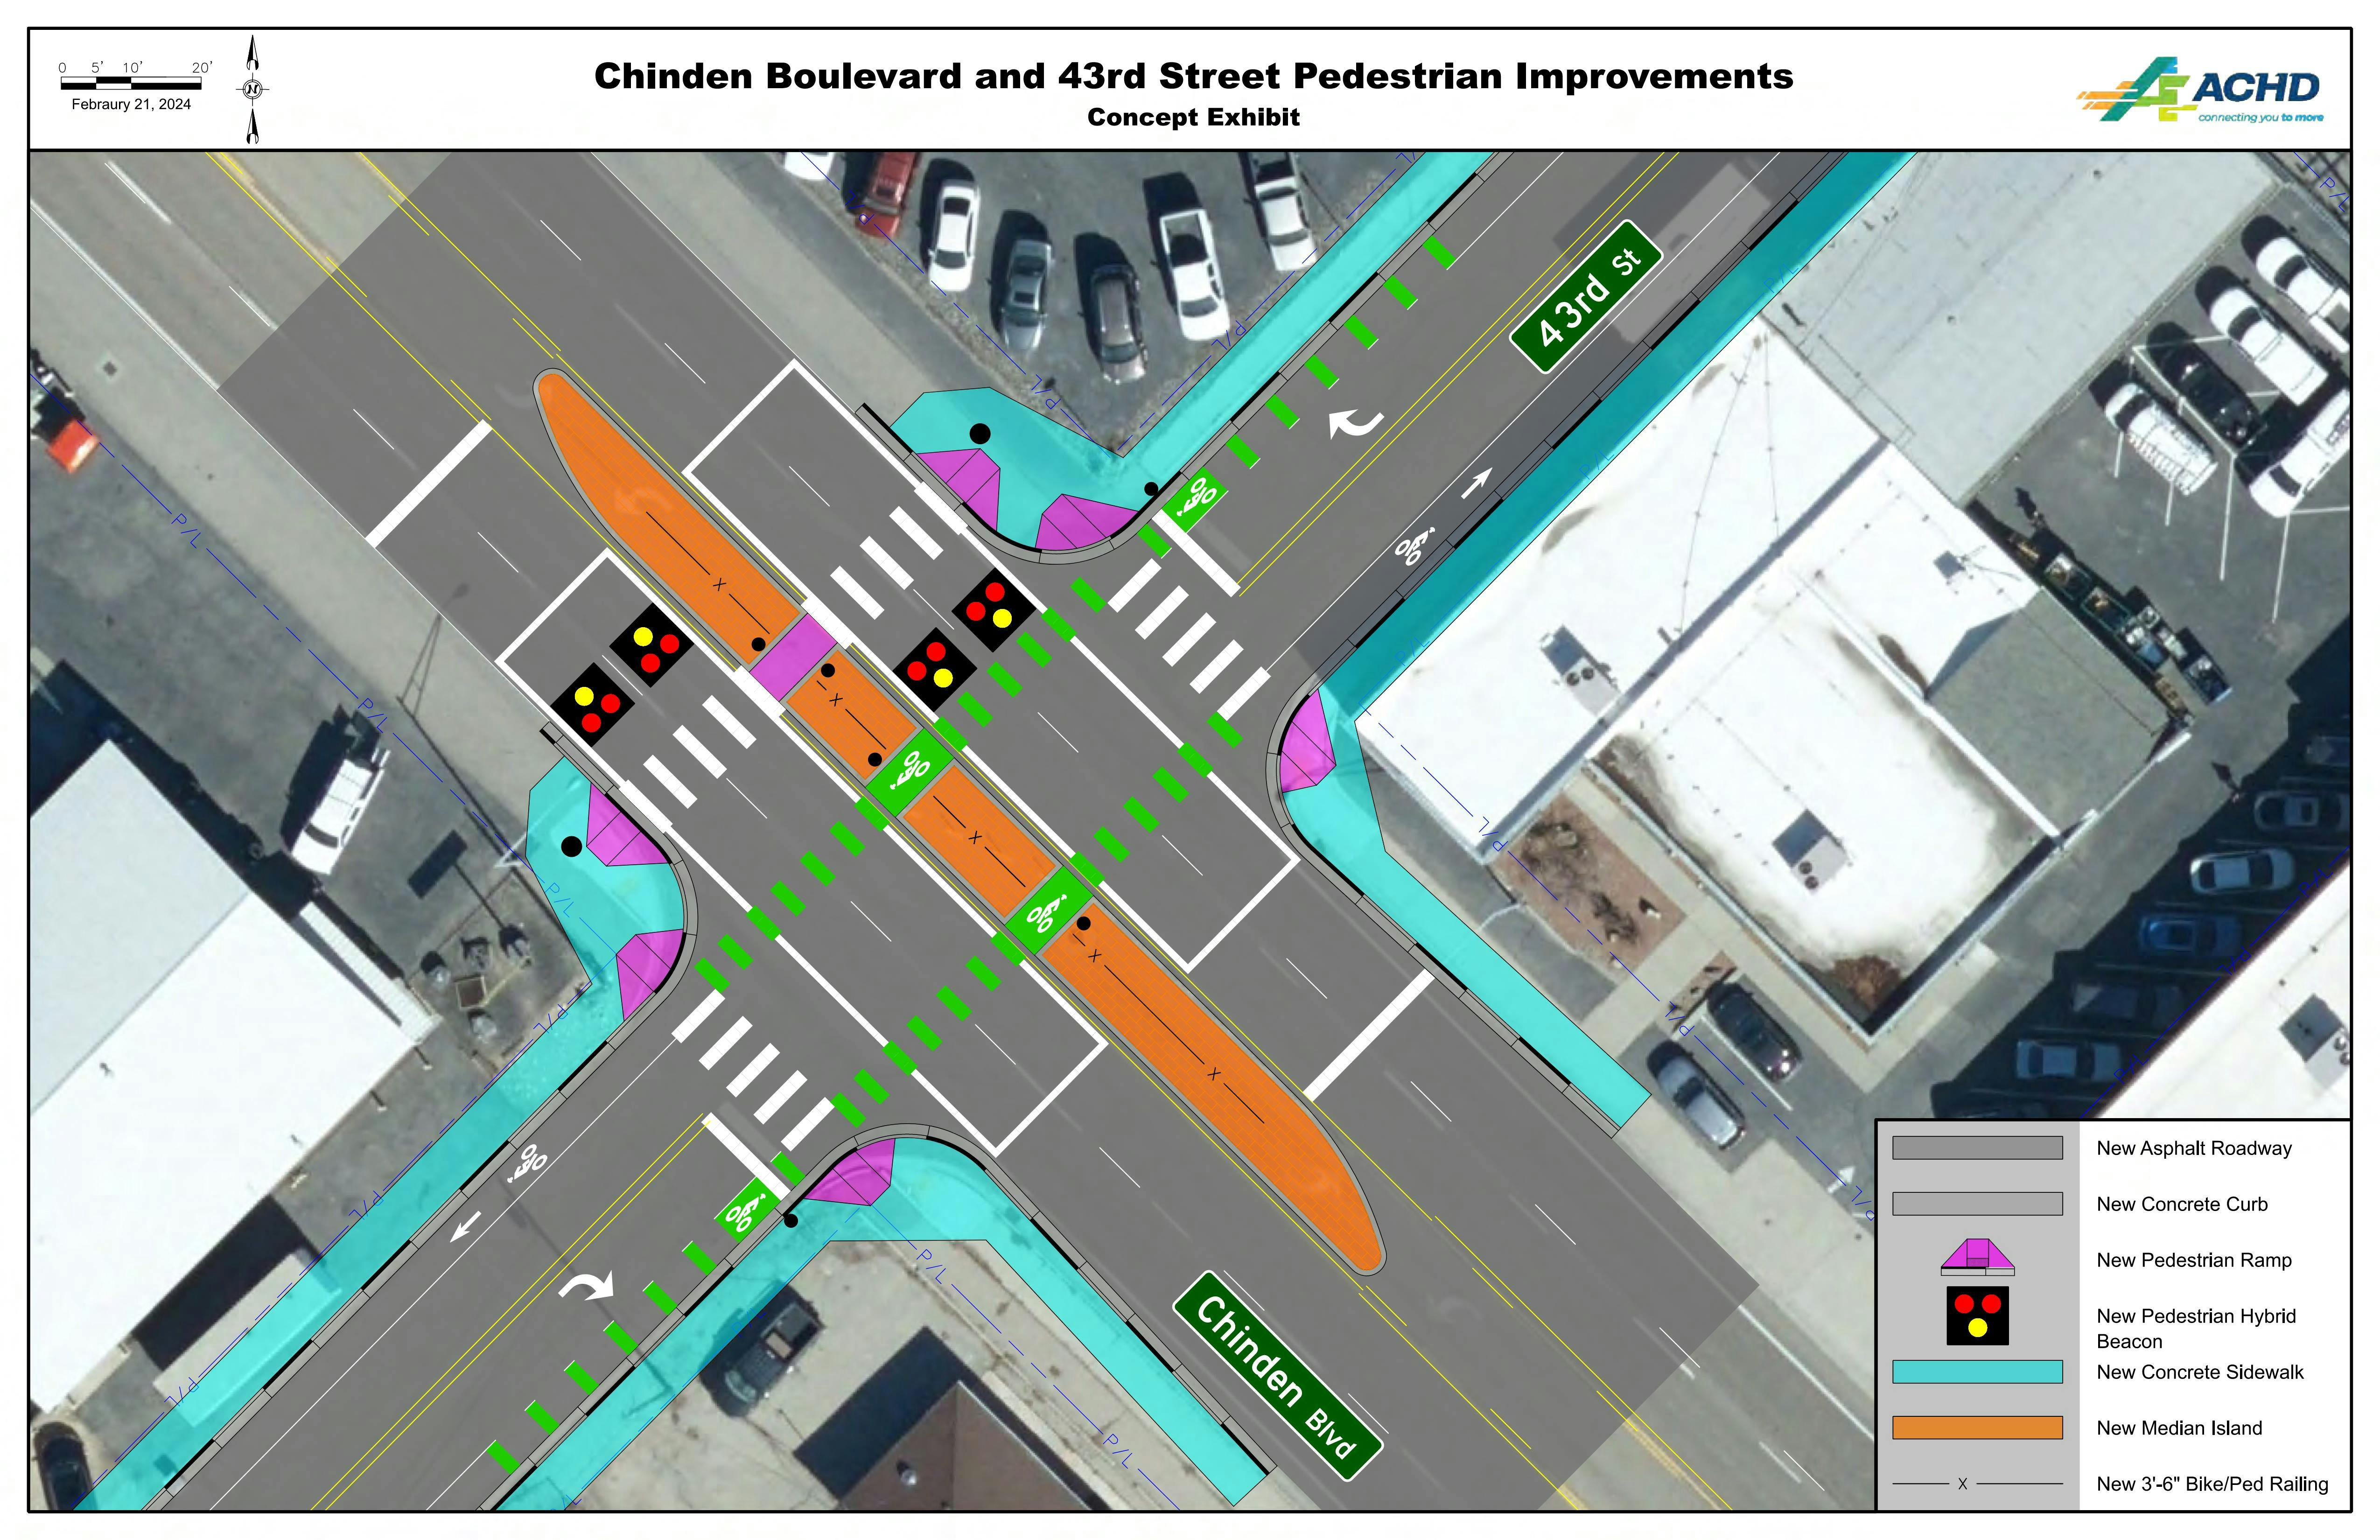 Chinden Boulevard and 43rd Street Crossing Concept Exhibit 